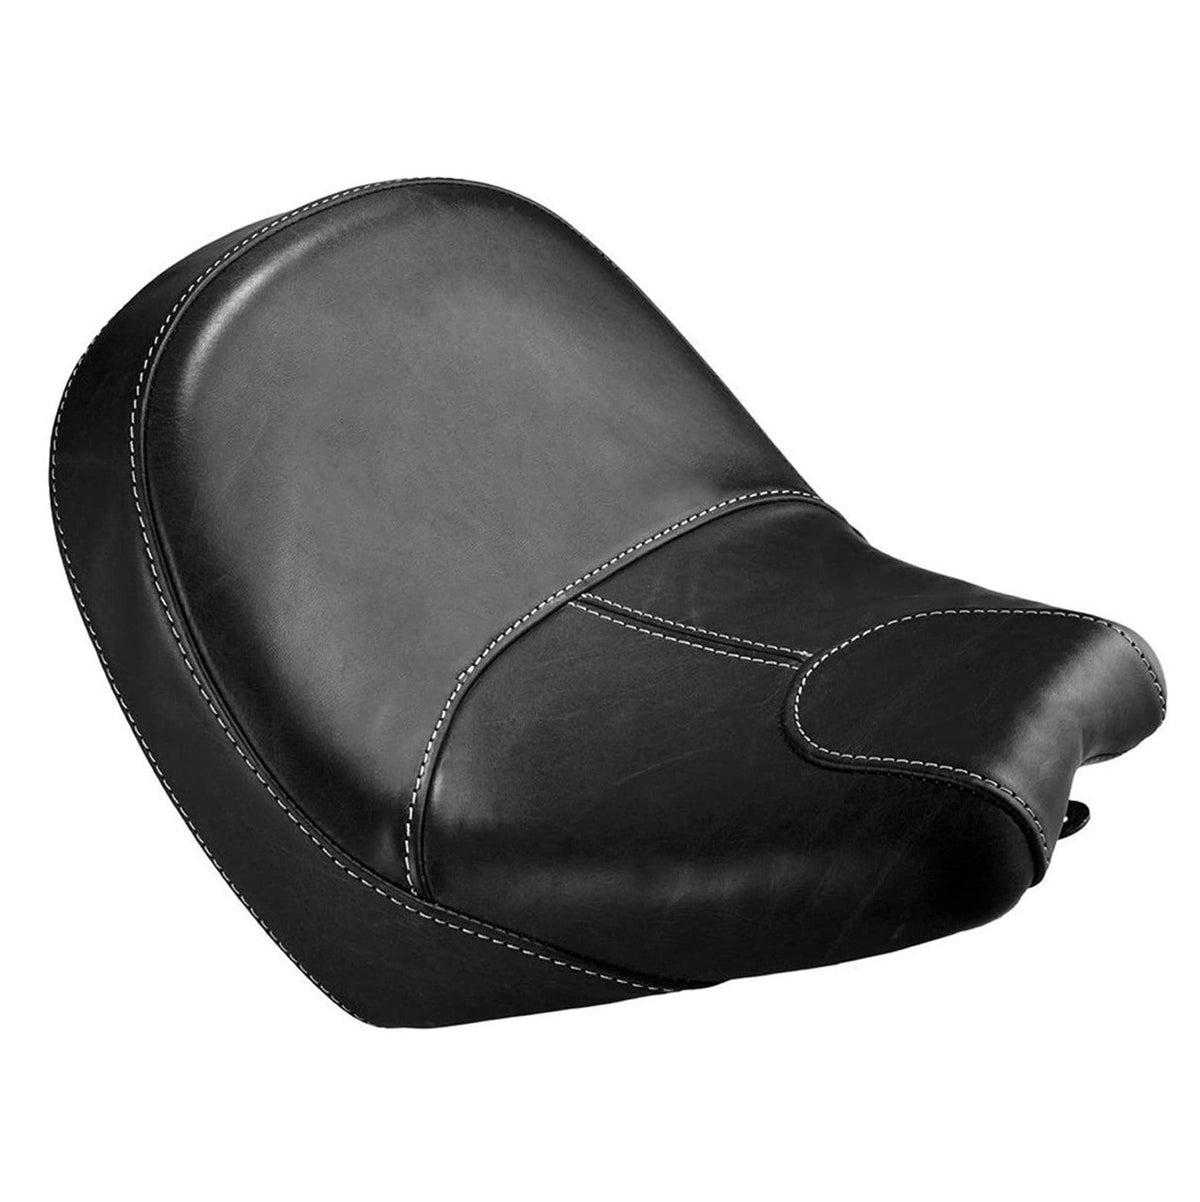 Indian Motorcycle Reduced Reach Rider Seat, Black | 2880241-01